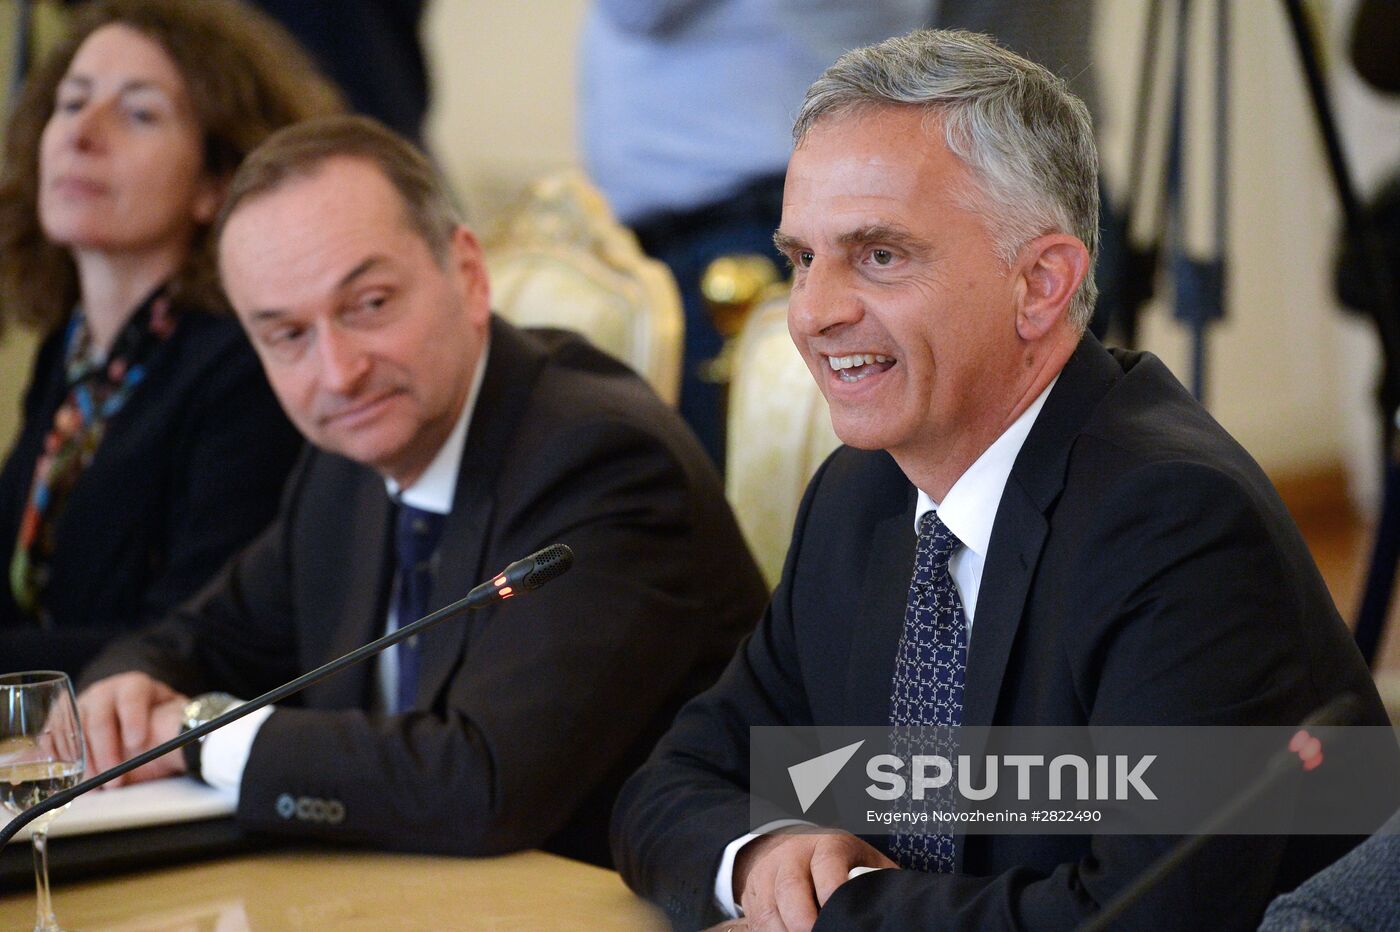 Russian Foreign Minister Sergei Lavrov meets with his Swiss counterpart Didier Burkhalter